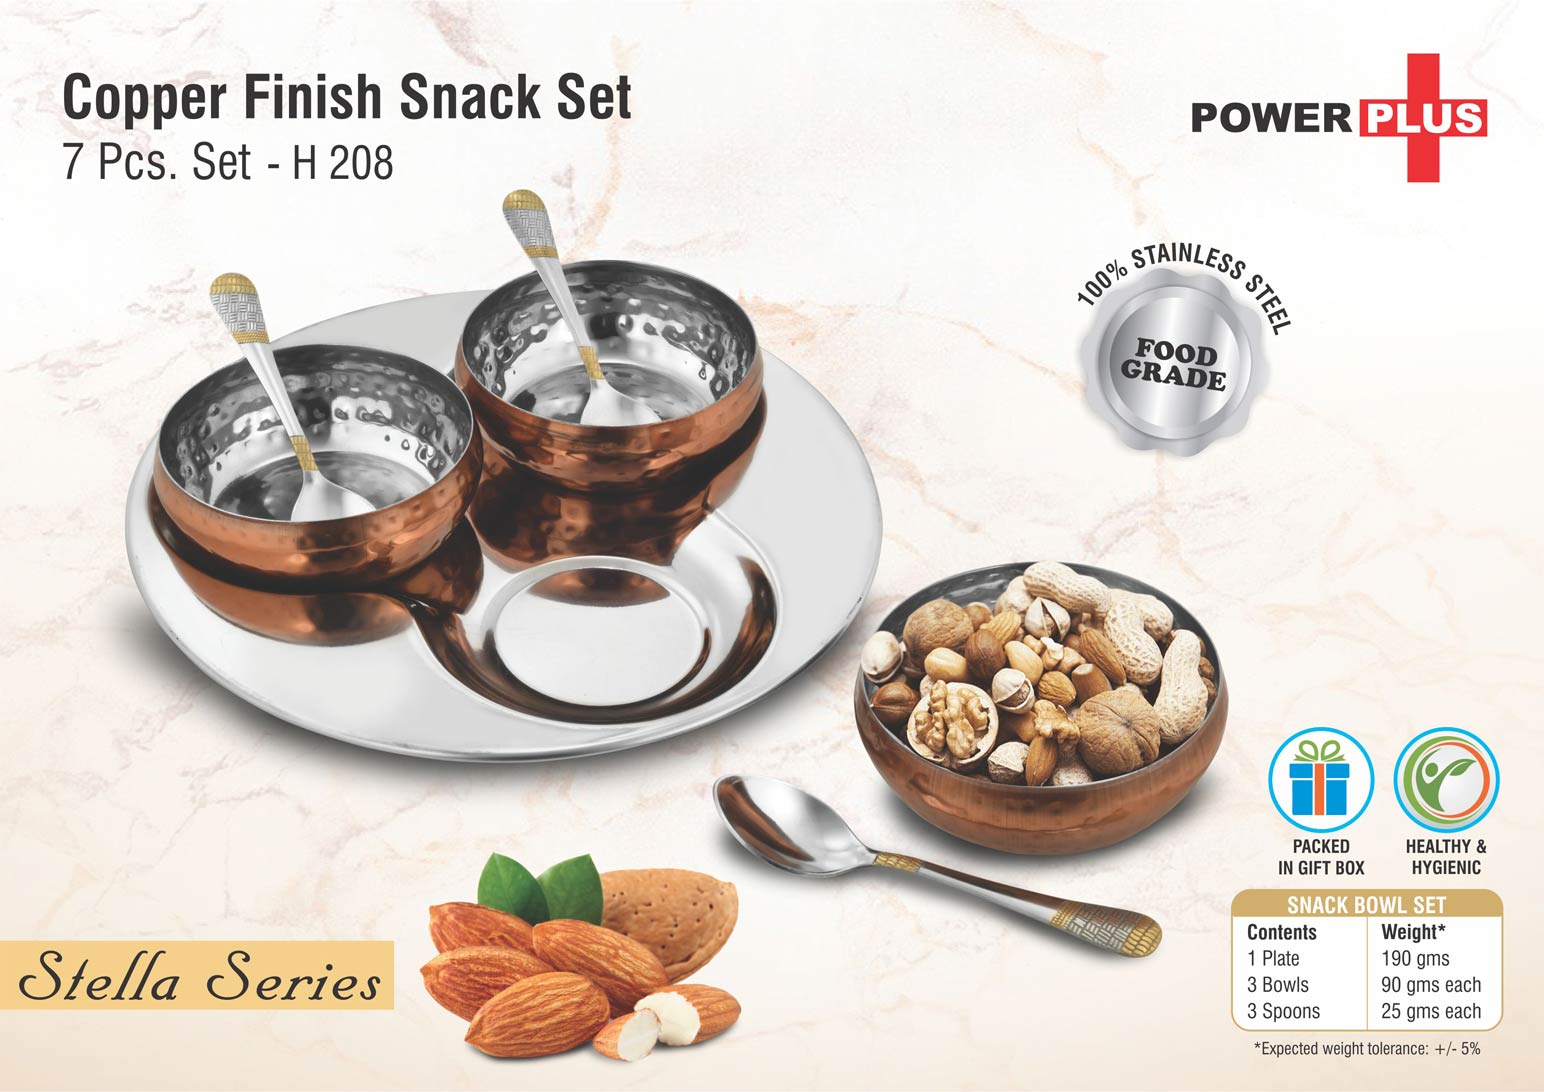 7 pc Copper Finish Snack Set with Bowls, Spoons, and Serving Tray